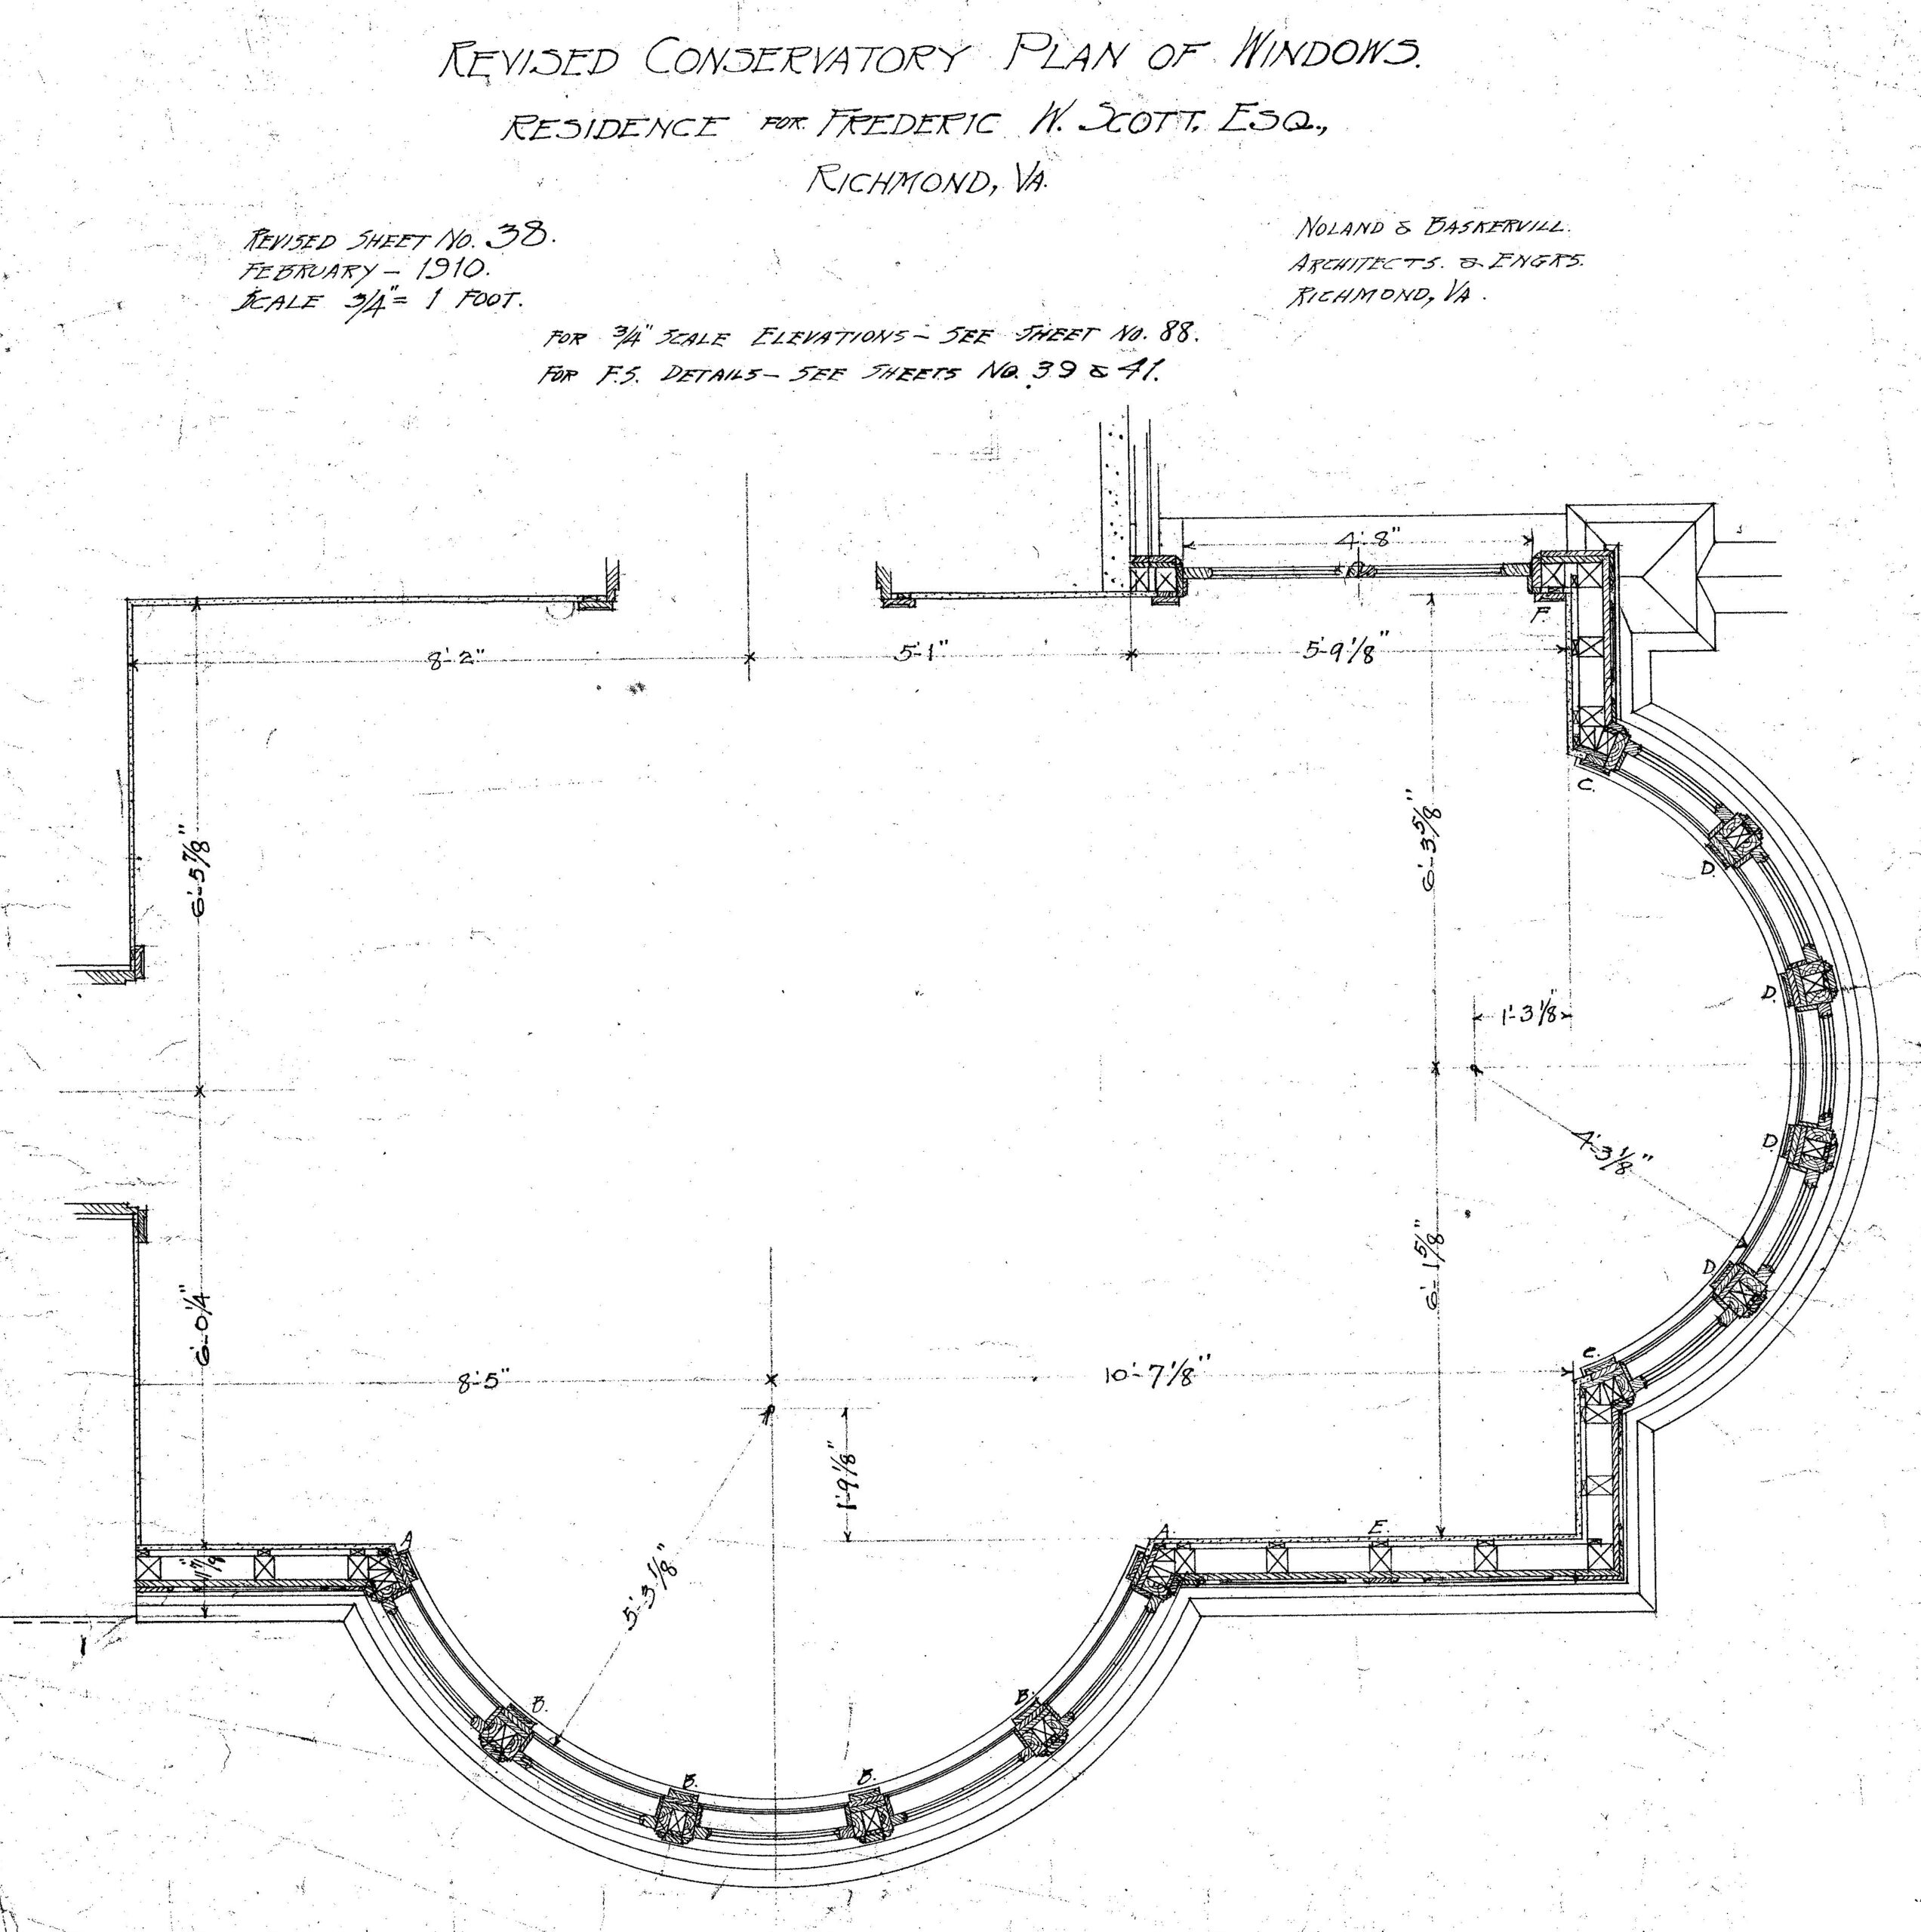 1910 revised plans for the Breakfast Room of the Scott House by Noland & Baskervill.